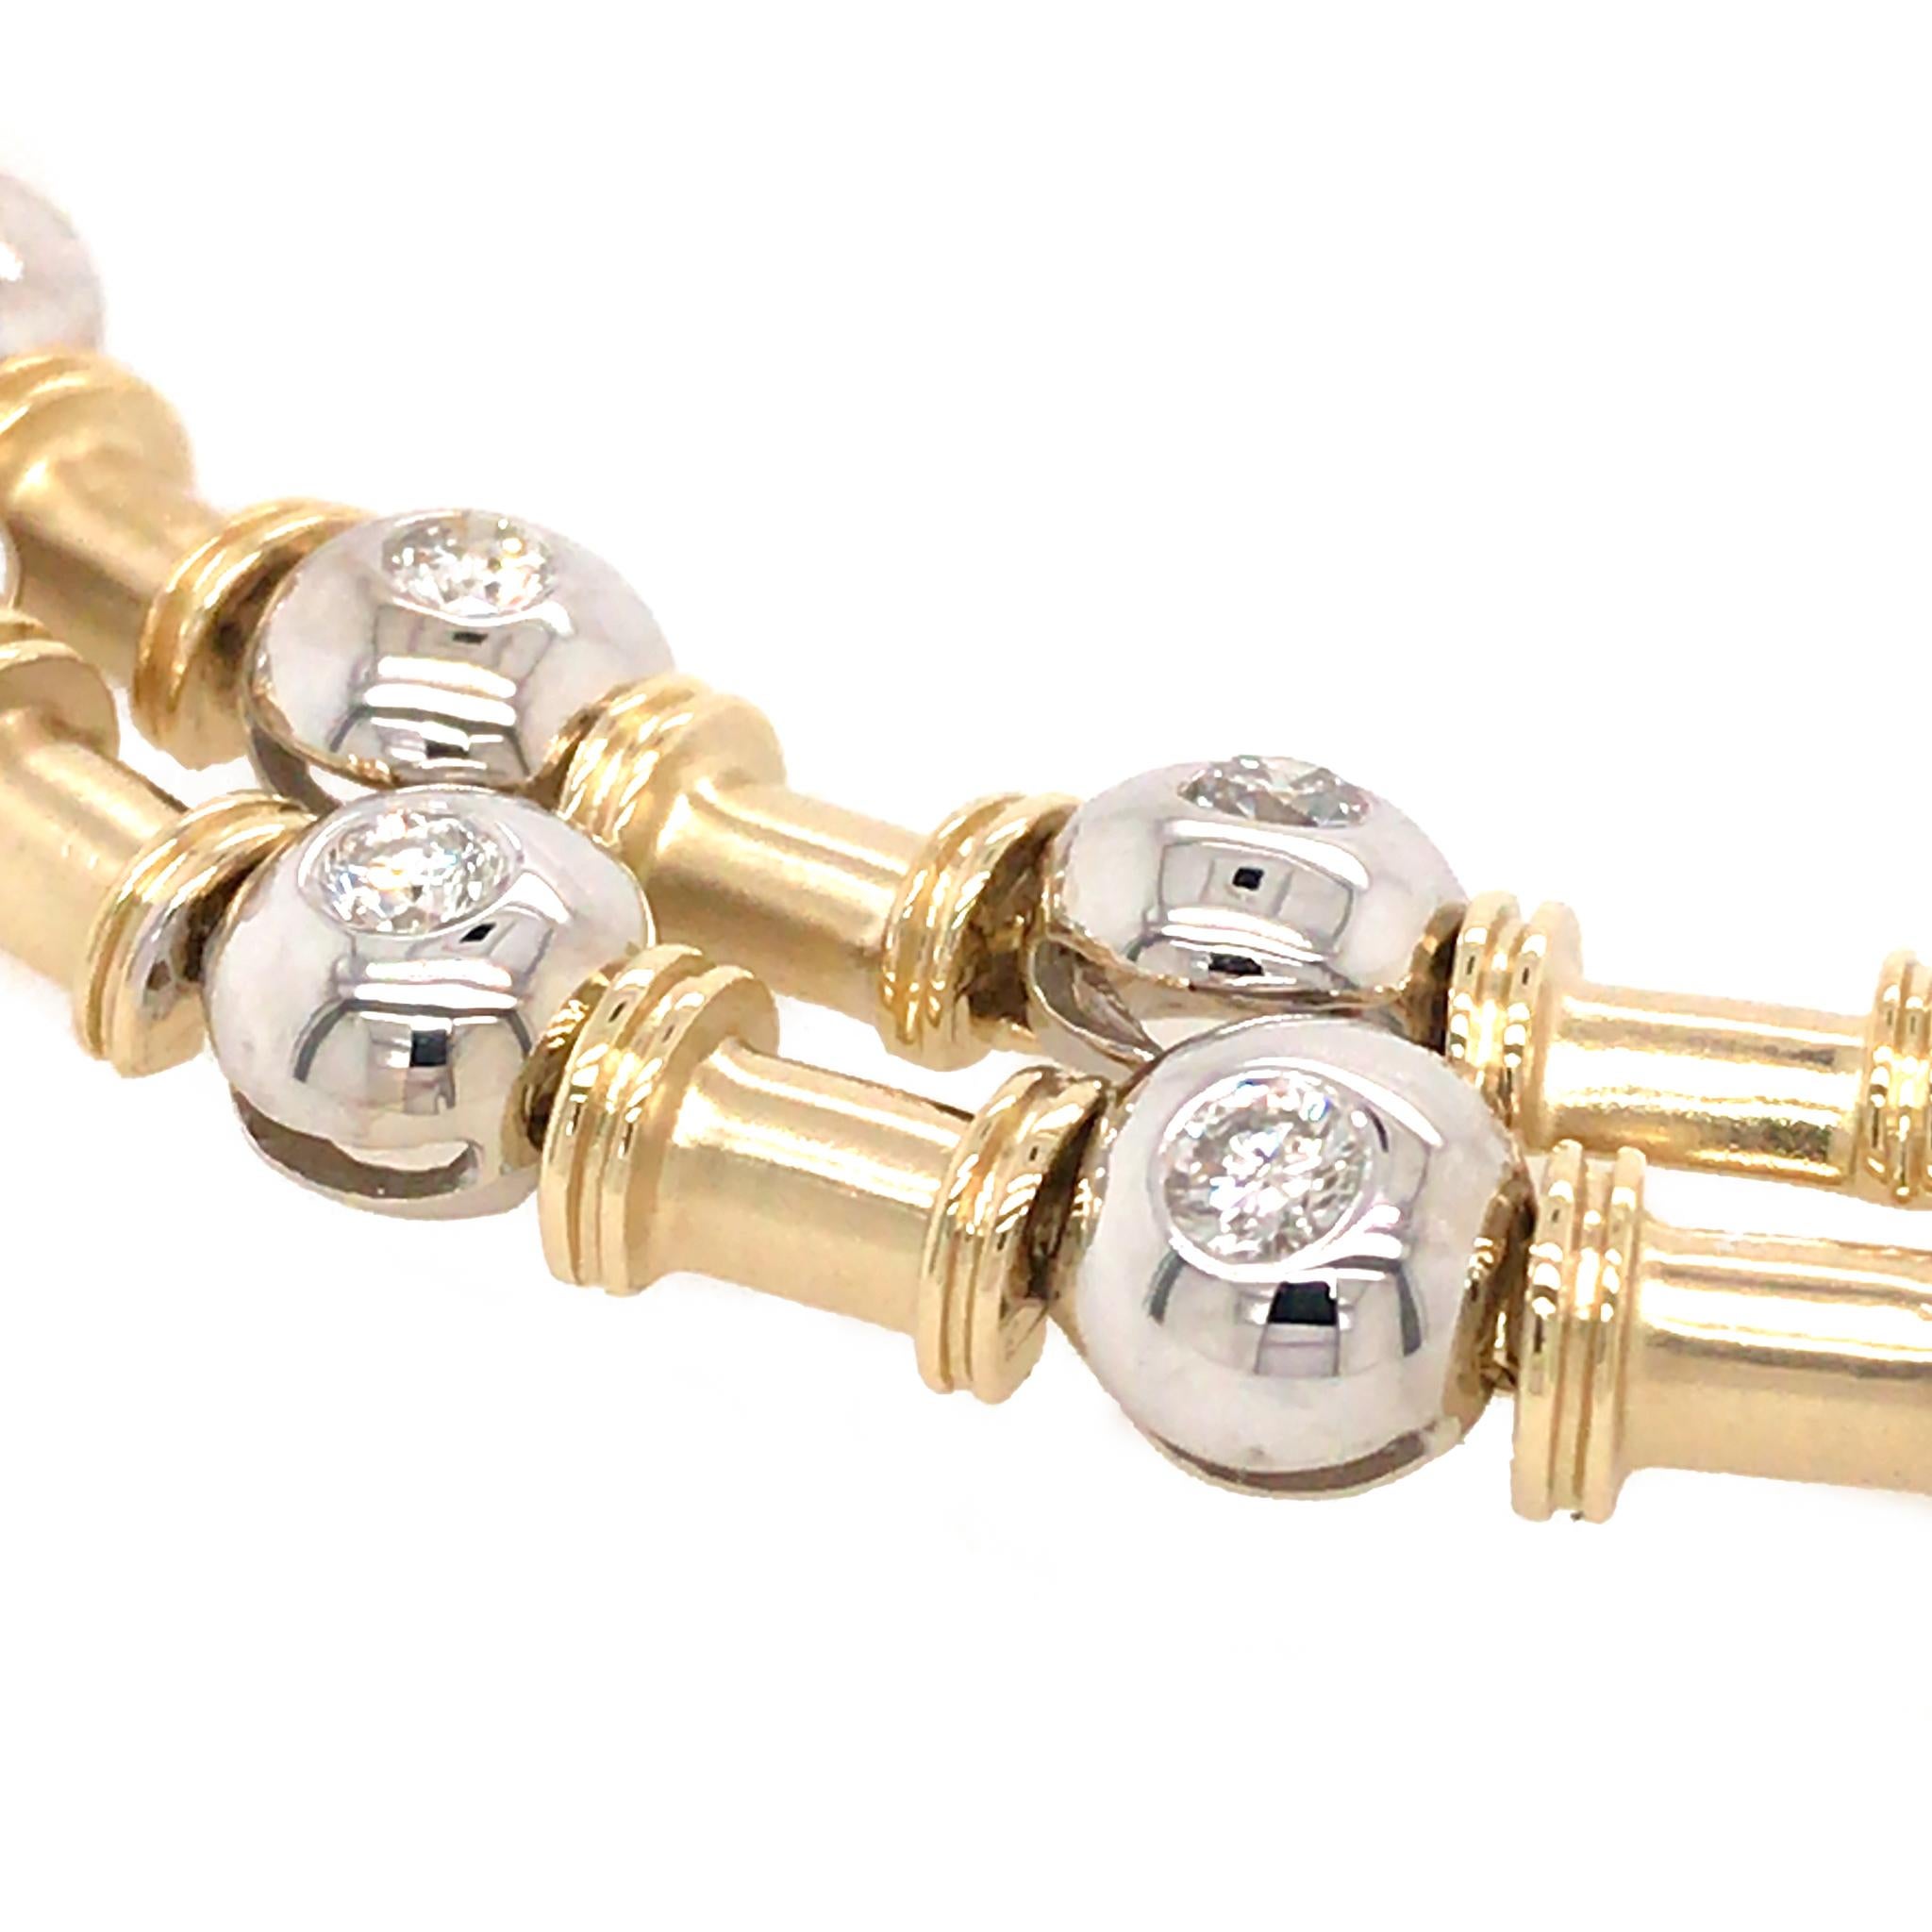 Bamboo and Bead Motif, 14k Yellow Gold Diamond Bezel Bracelet In Good Condition For Sale In New York, NY